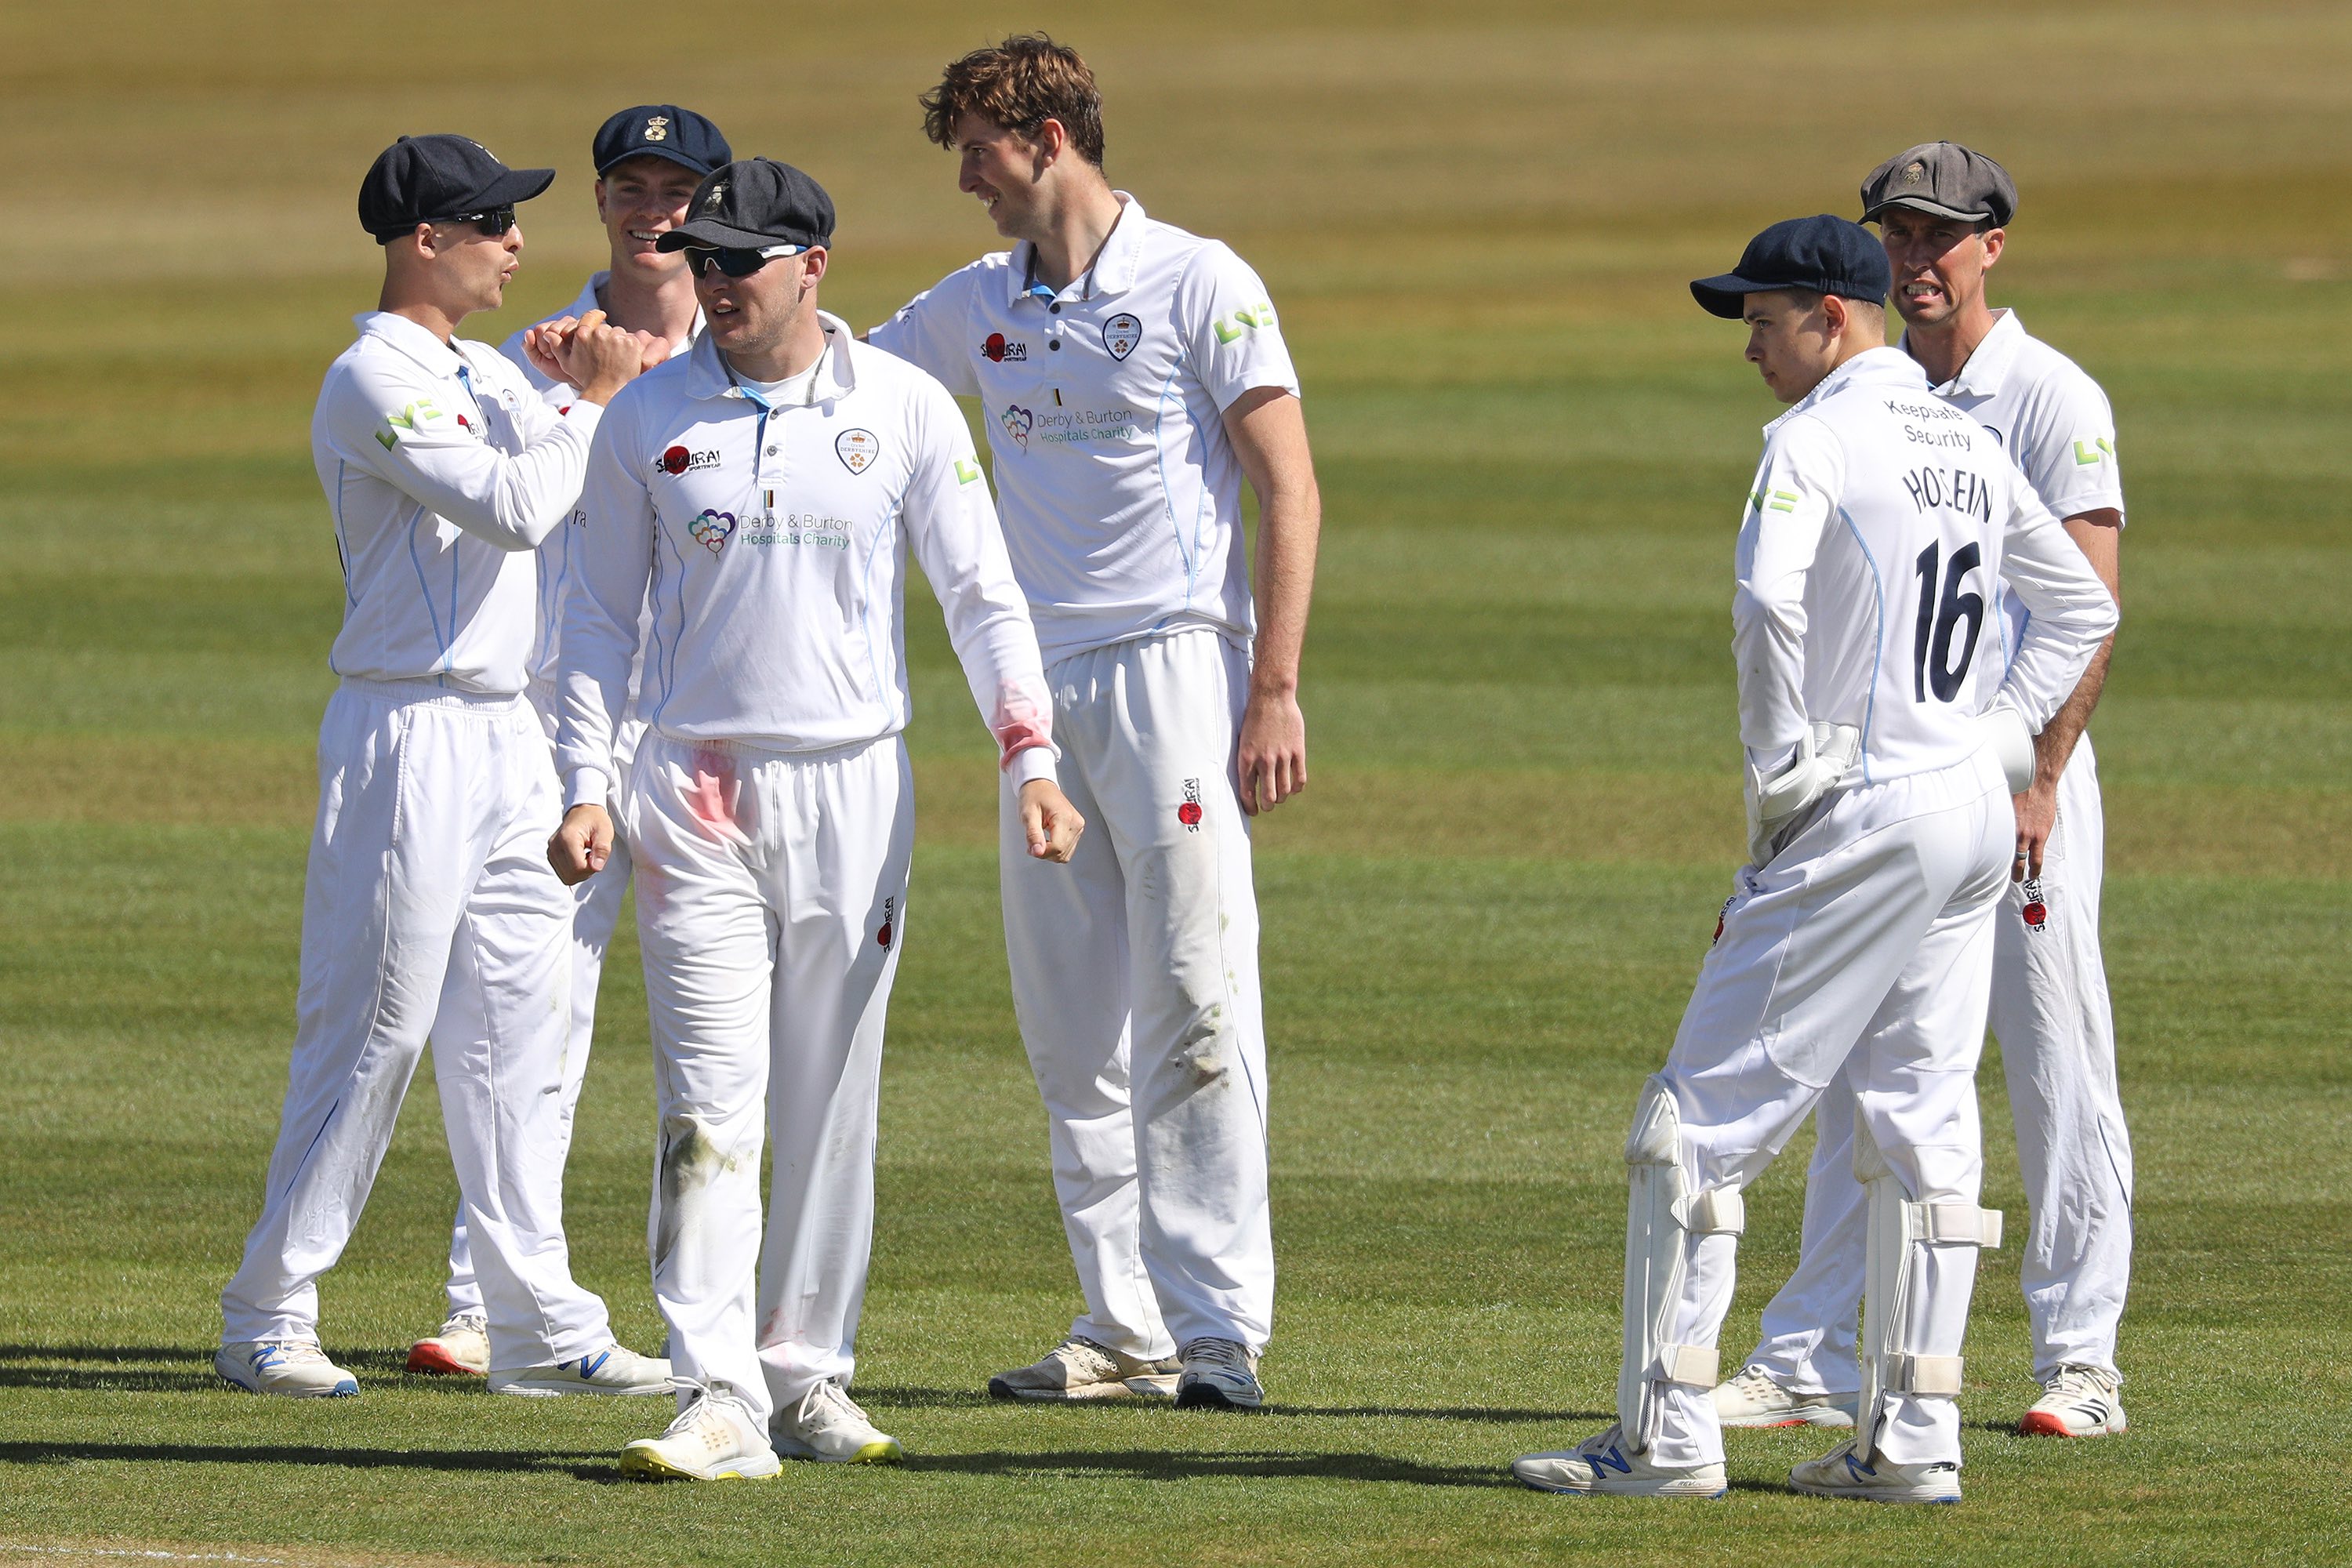 Derbyshire's game against Essex abandoned after a player tests COVID positive 